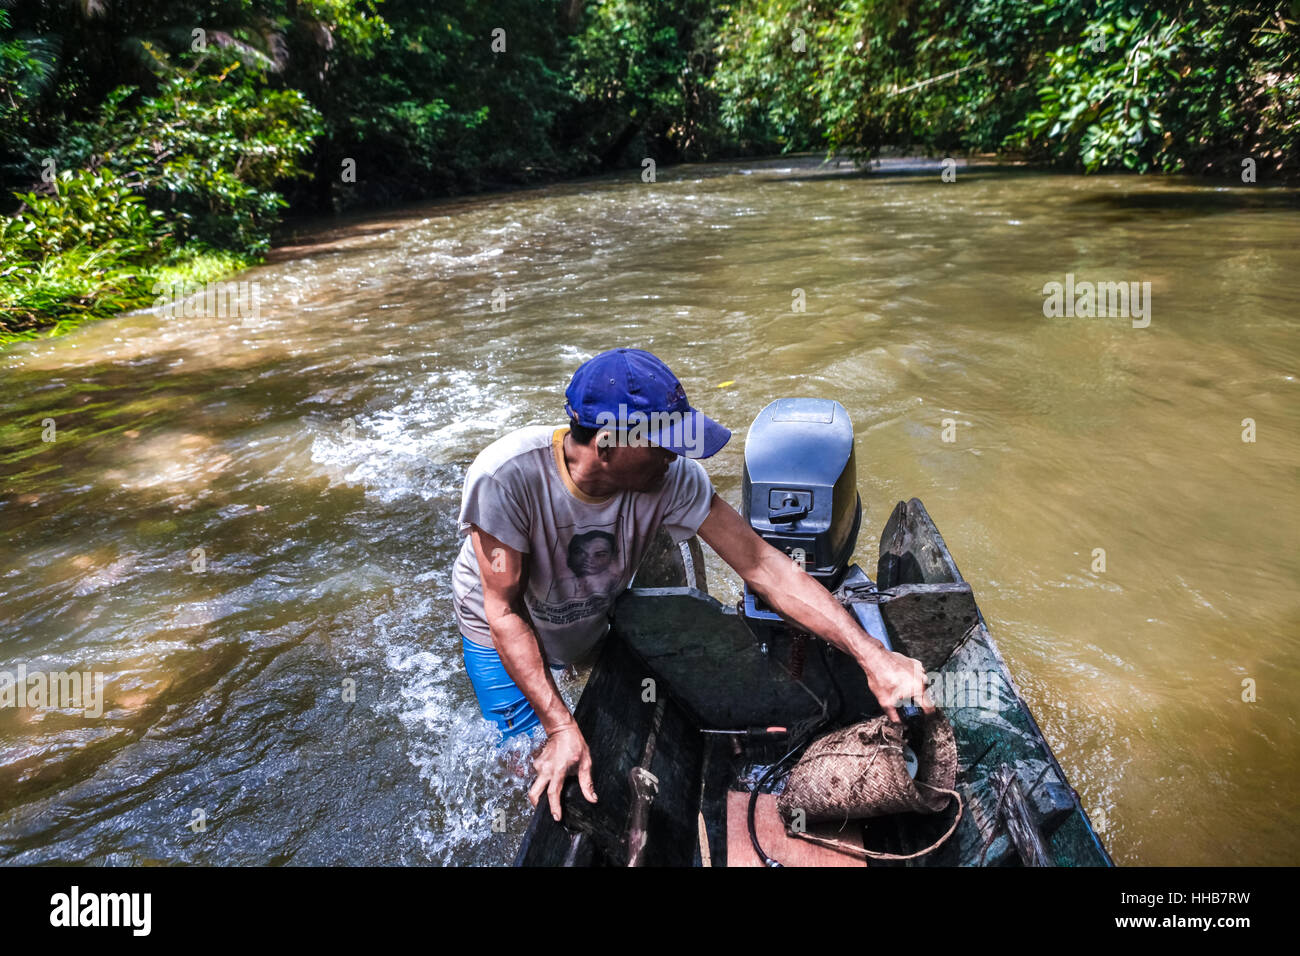 A boat motorist pushing the boat to move on shallow water in the river, through a customary forest in Kapuas Hulu, West Kalimantan, Indonesia. Stock Photo